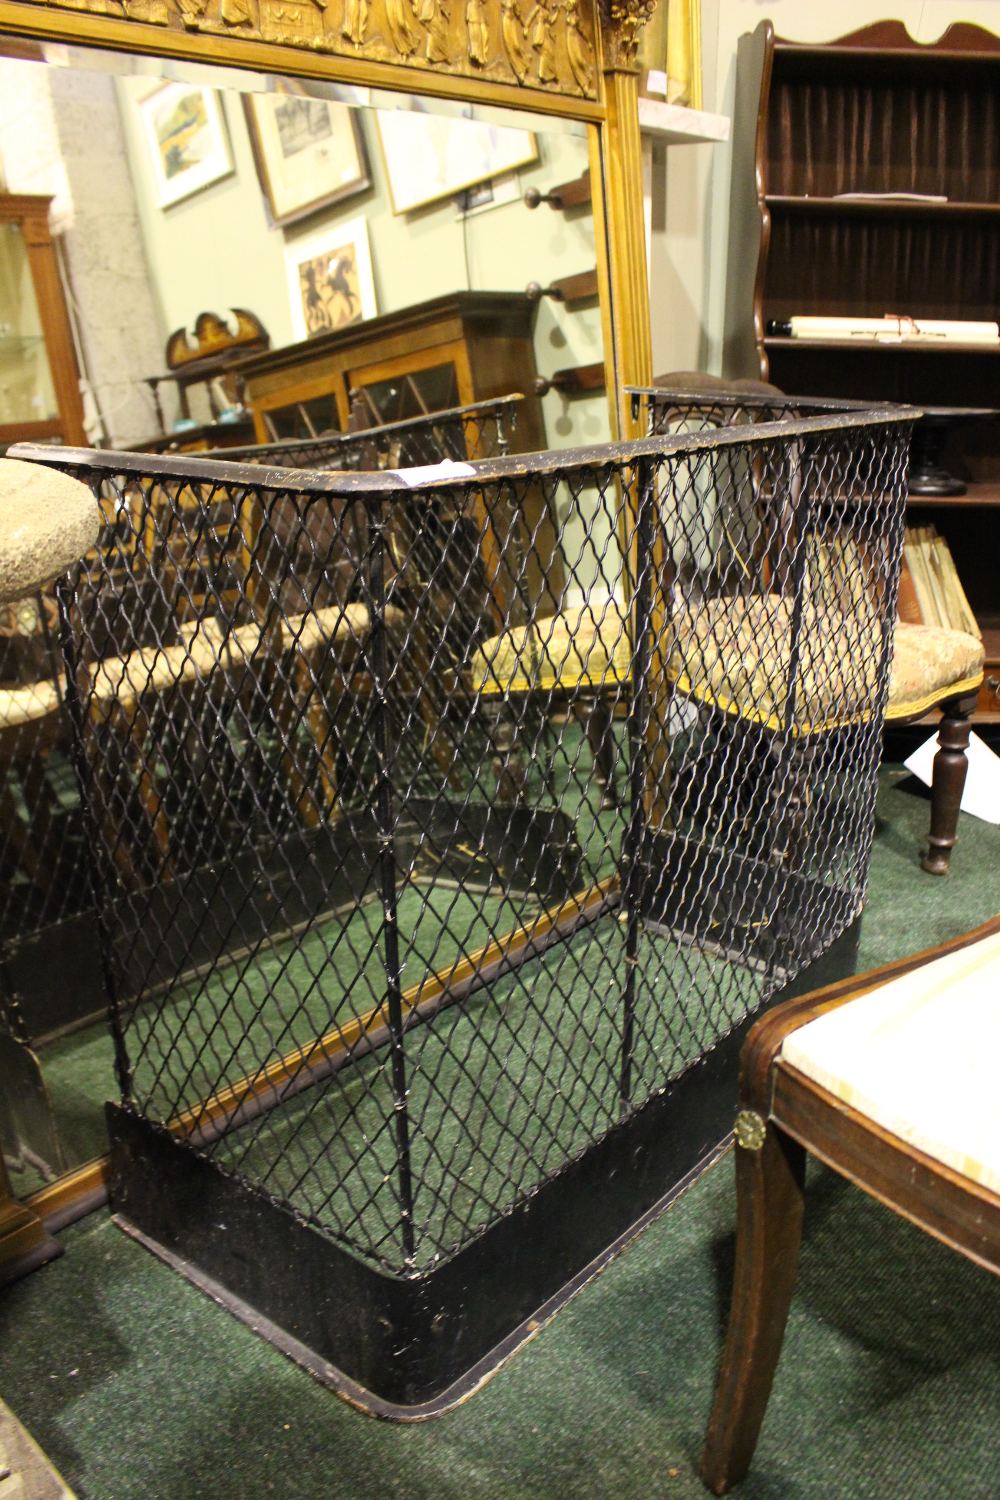 A LARGE LATE 19TH CENTURY / EARLY 20TH CENTURY MESH FIRE GUARD, 38” x 33” x 18” approx